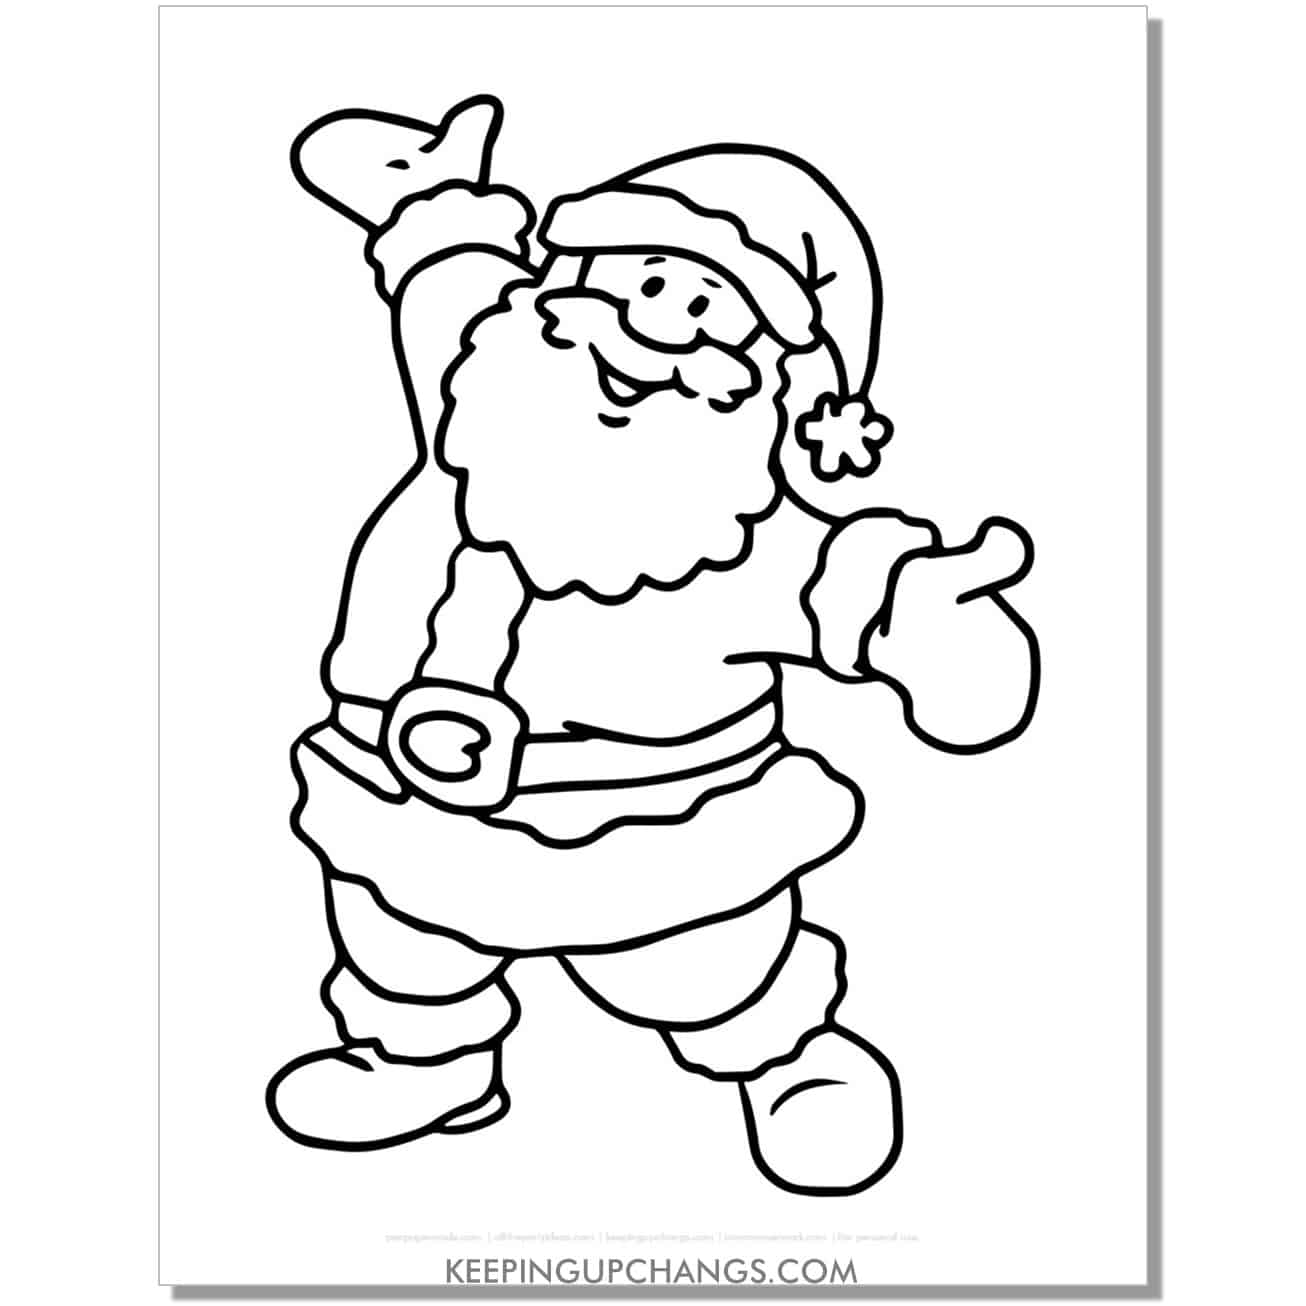 free jolly santa outline, template, cut out, coloring page.